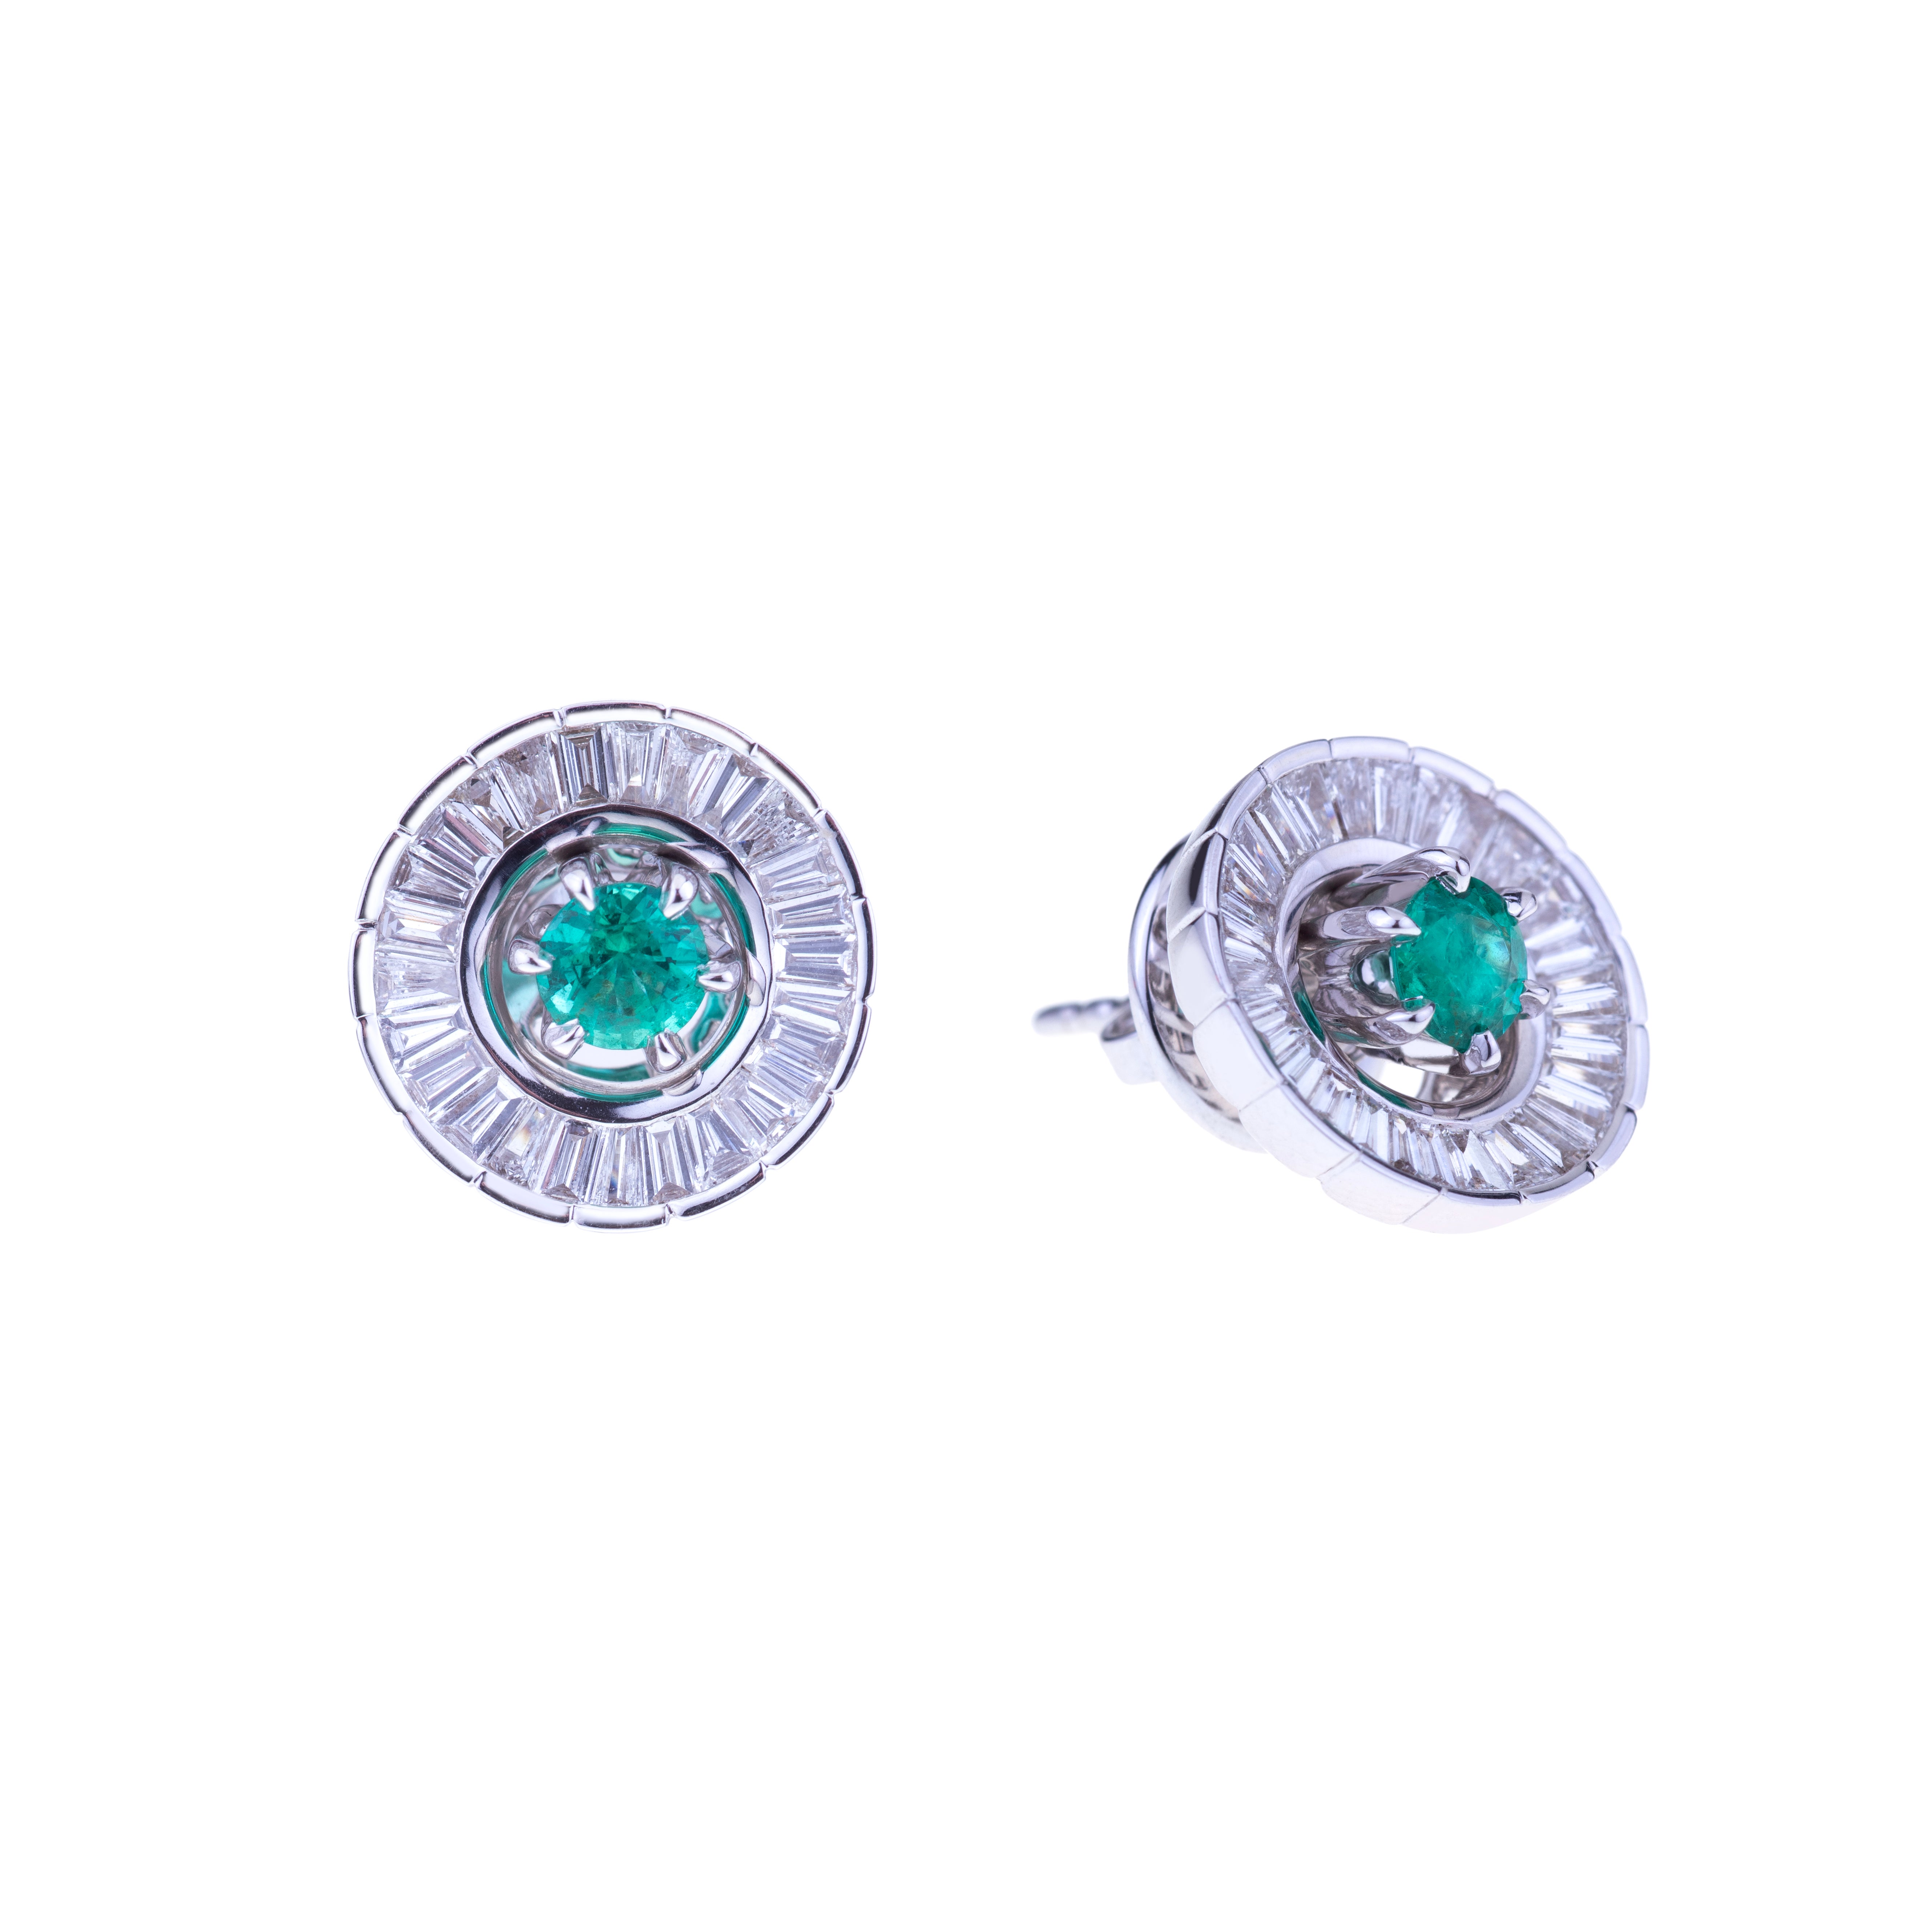 Striking Round Emerald Earrings with a Circle of Baguette Diamonds. 
The Emerald is Removable and Portable without the Diamonds, so You can Use Earrings as Everyday Jewel or for the Most Relevant Event of Your Life. 
The Idea makes this Earrings